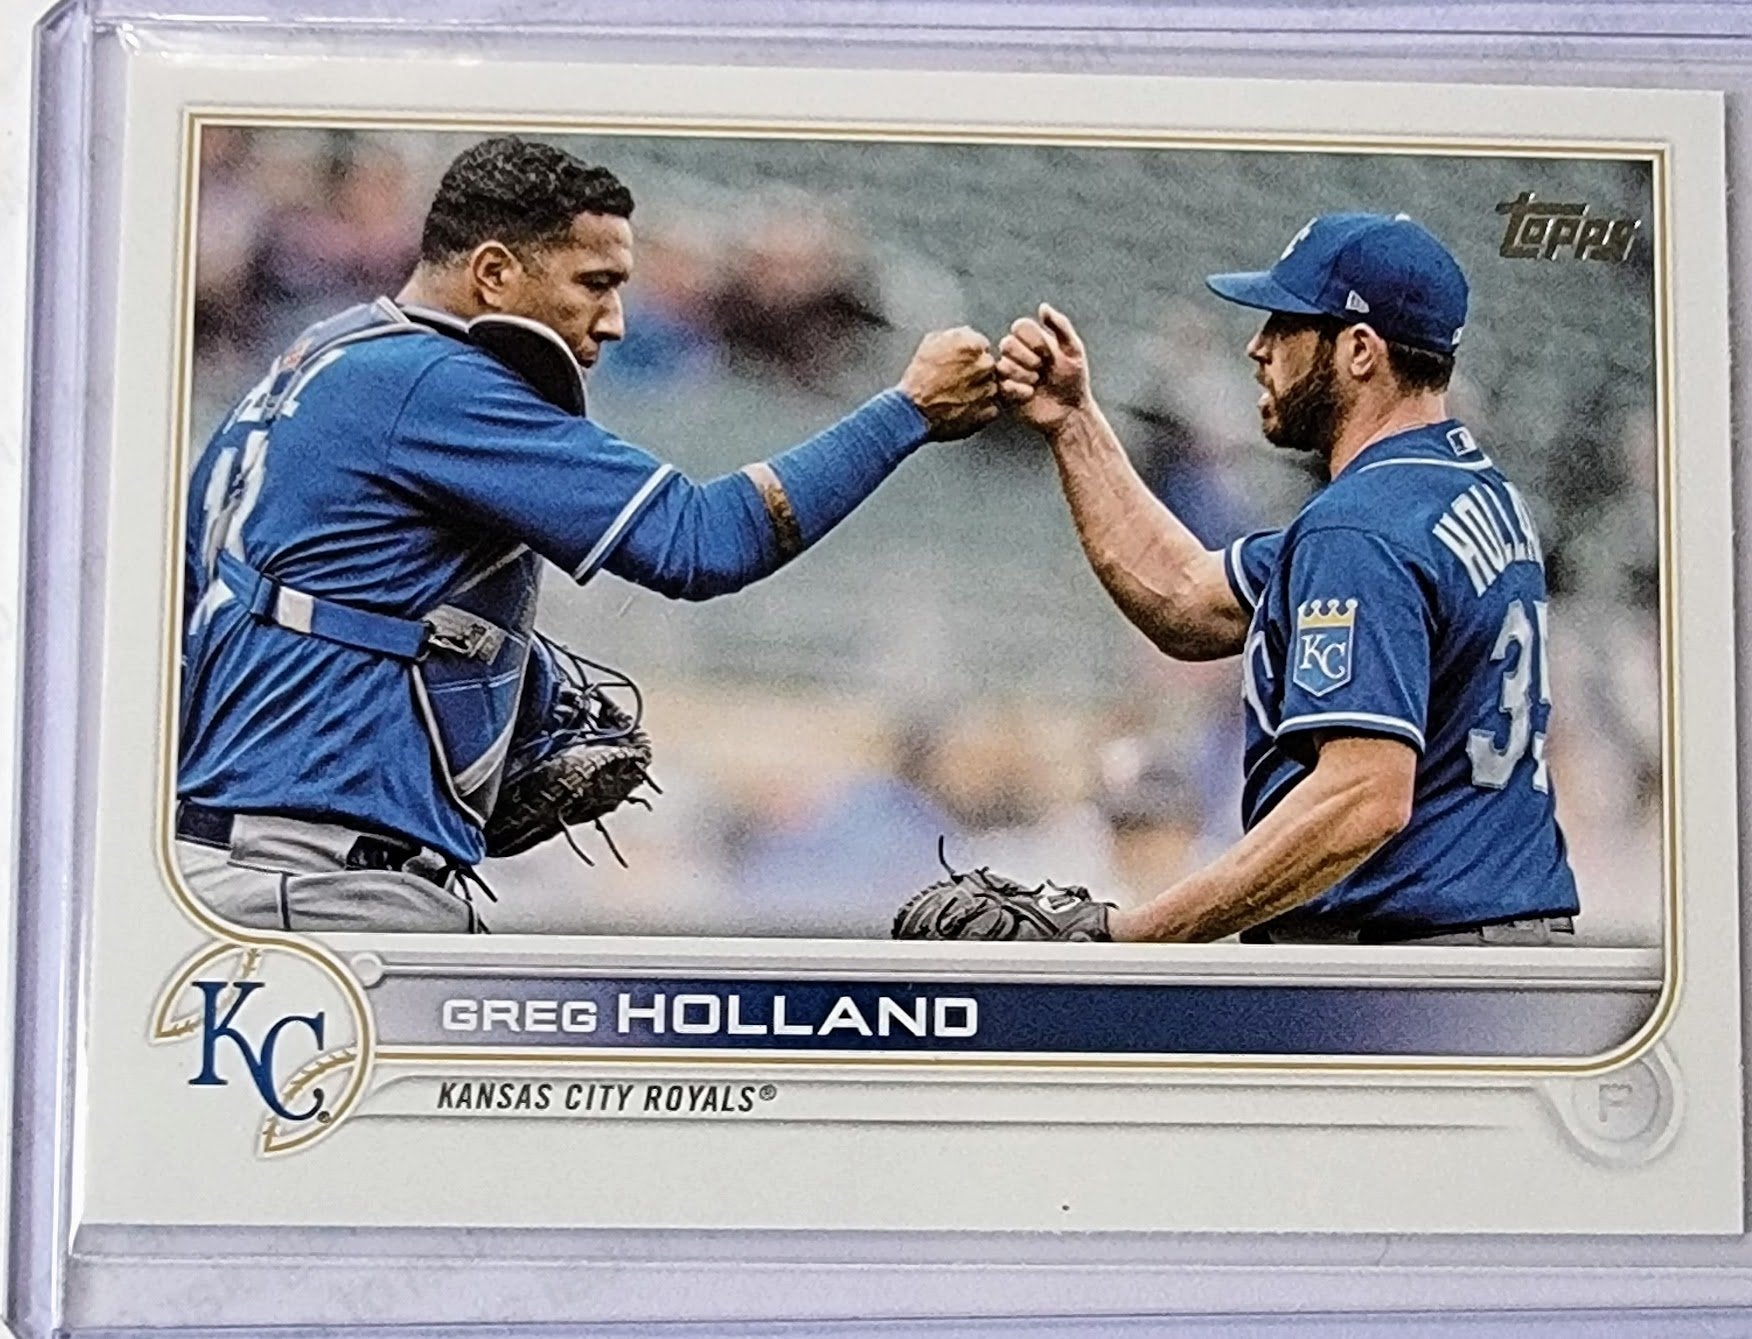 2022 Topps Greg Holland Baseball Trading Card GRB1 simple Xclusive Collectibles   